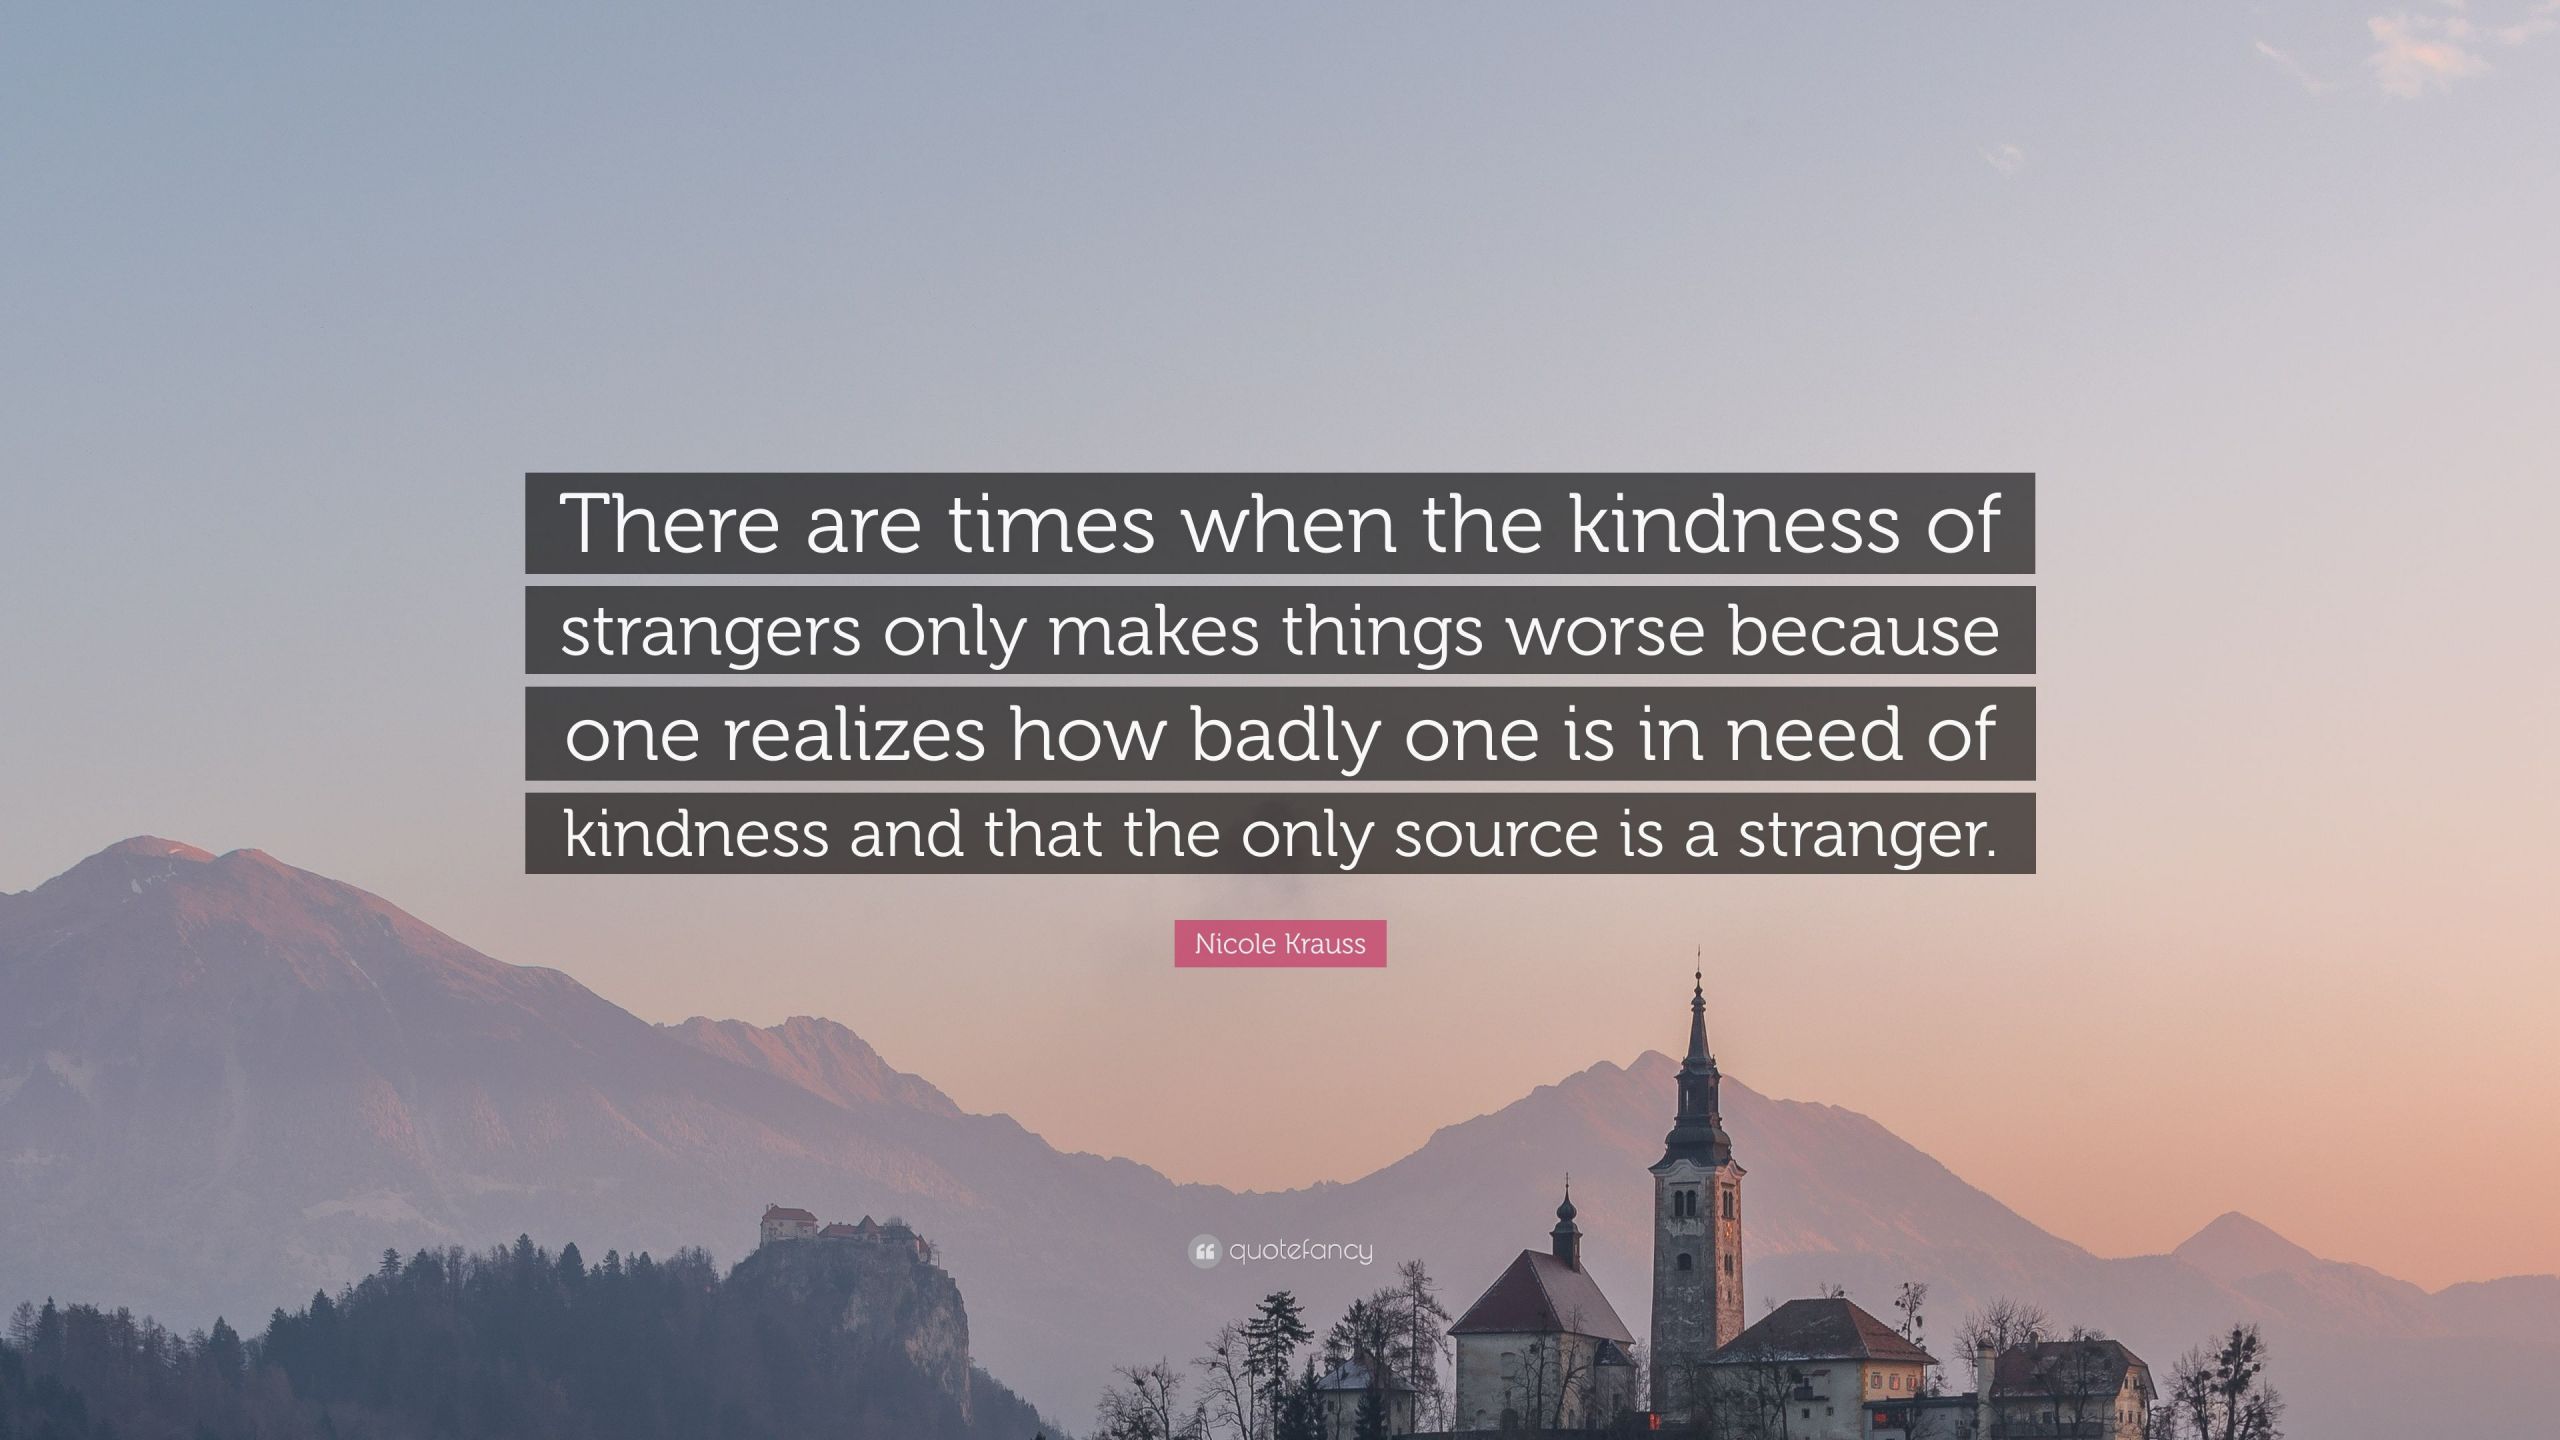 Kindness Of Strangers Quotes
 Nicole Krauss Quote “There are times when the kindness of